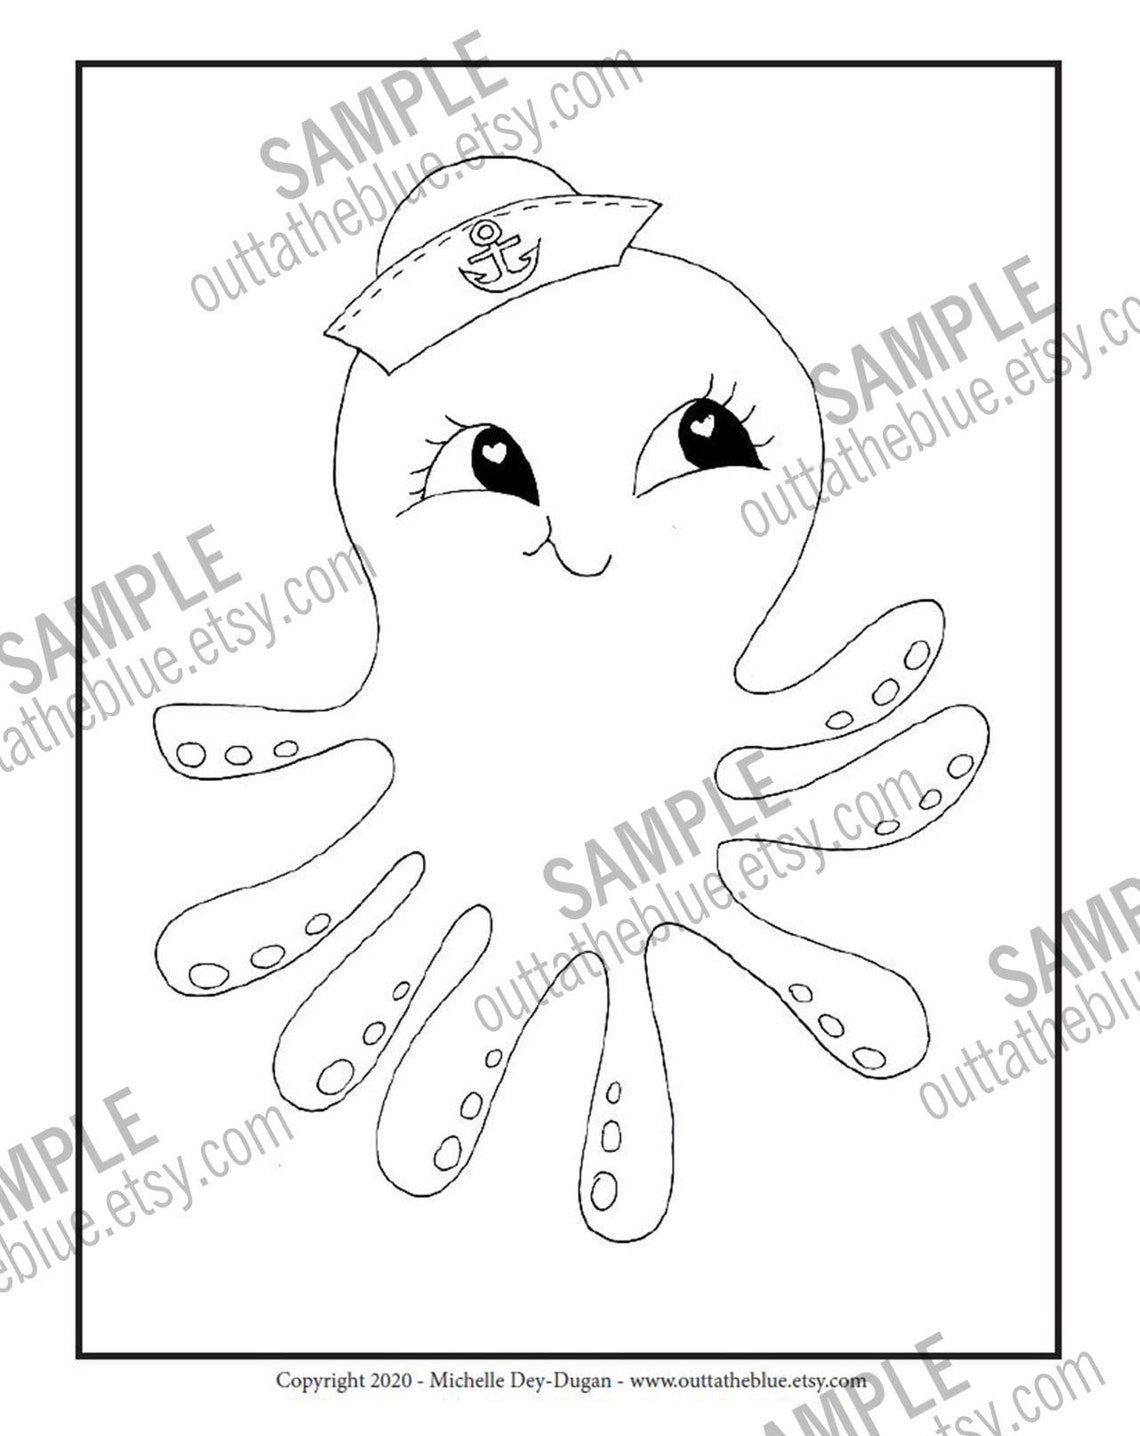 Cute Sea Printable Coloring Pages for kids, digital upload PDF files, children's coloring sheets, mermaid pictures to color, 15 pages